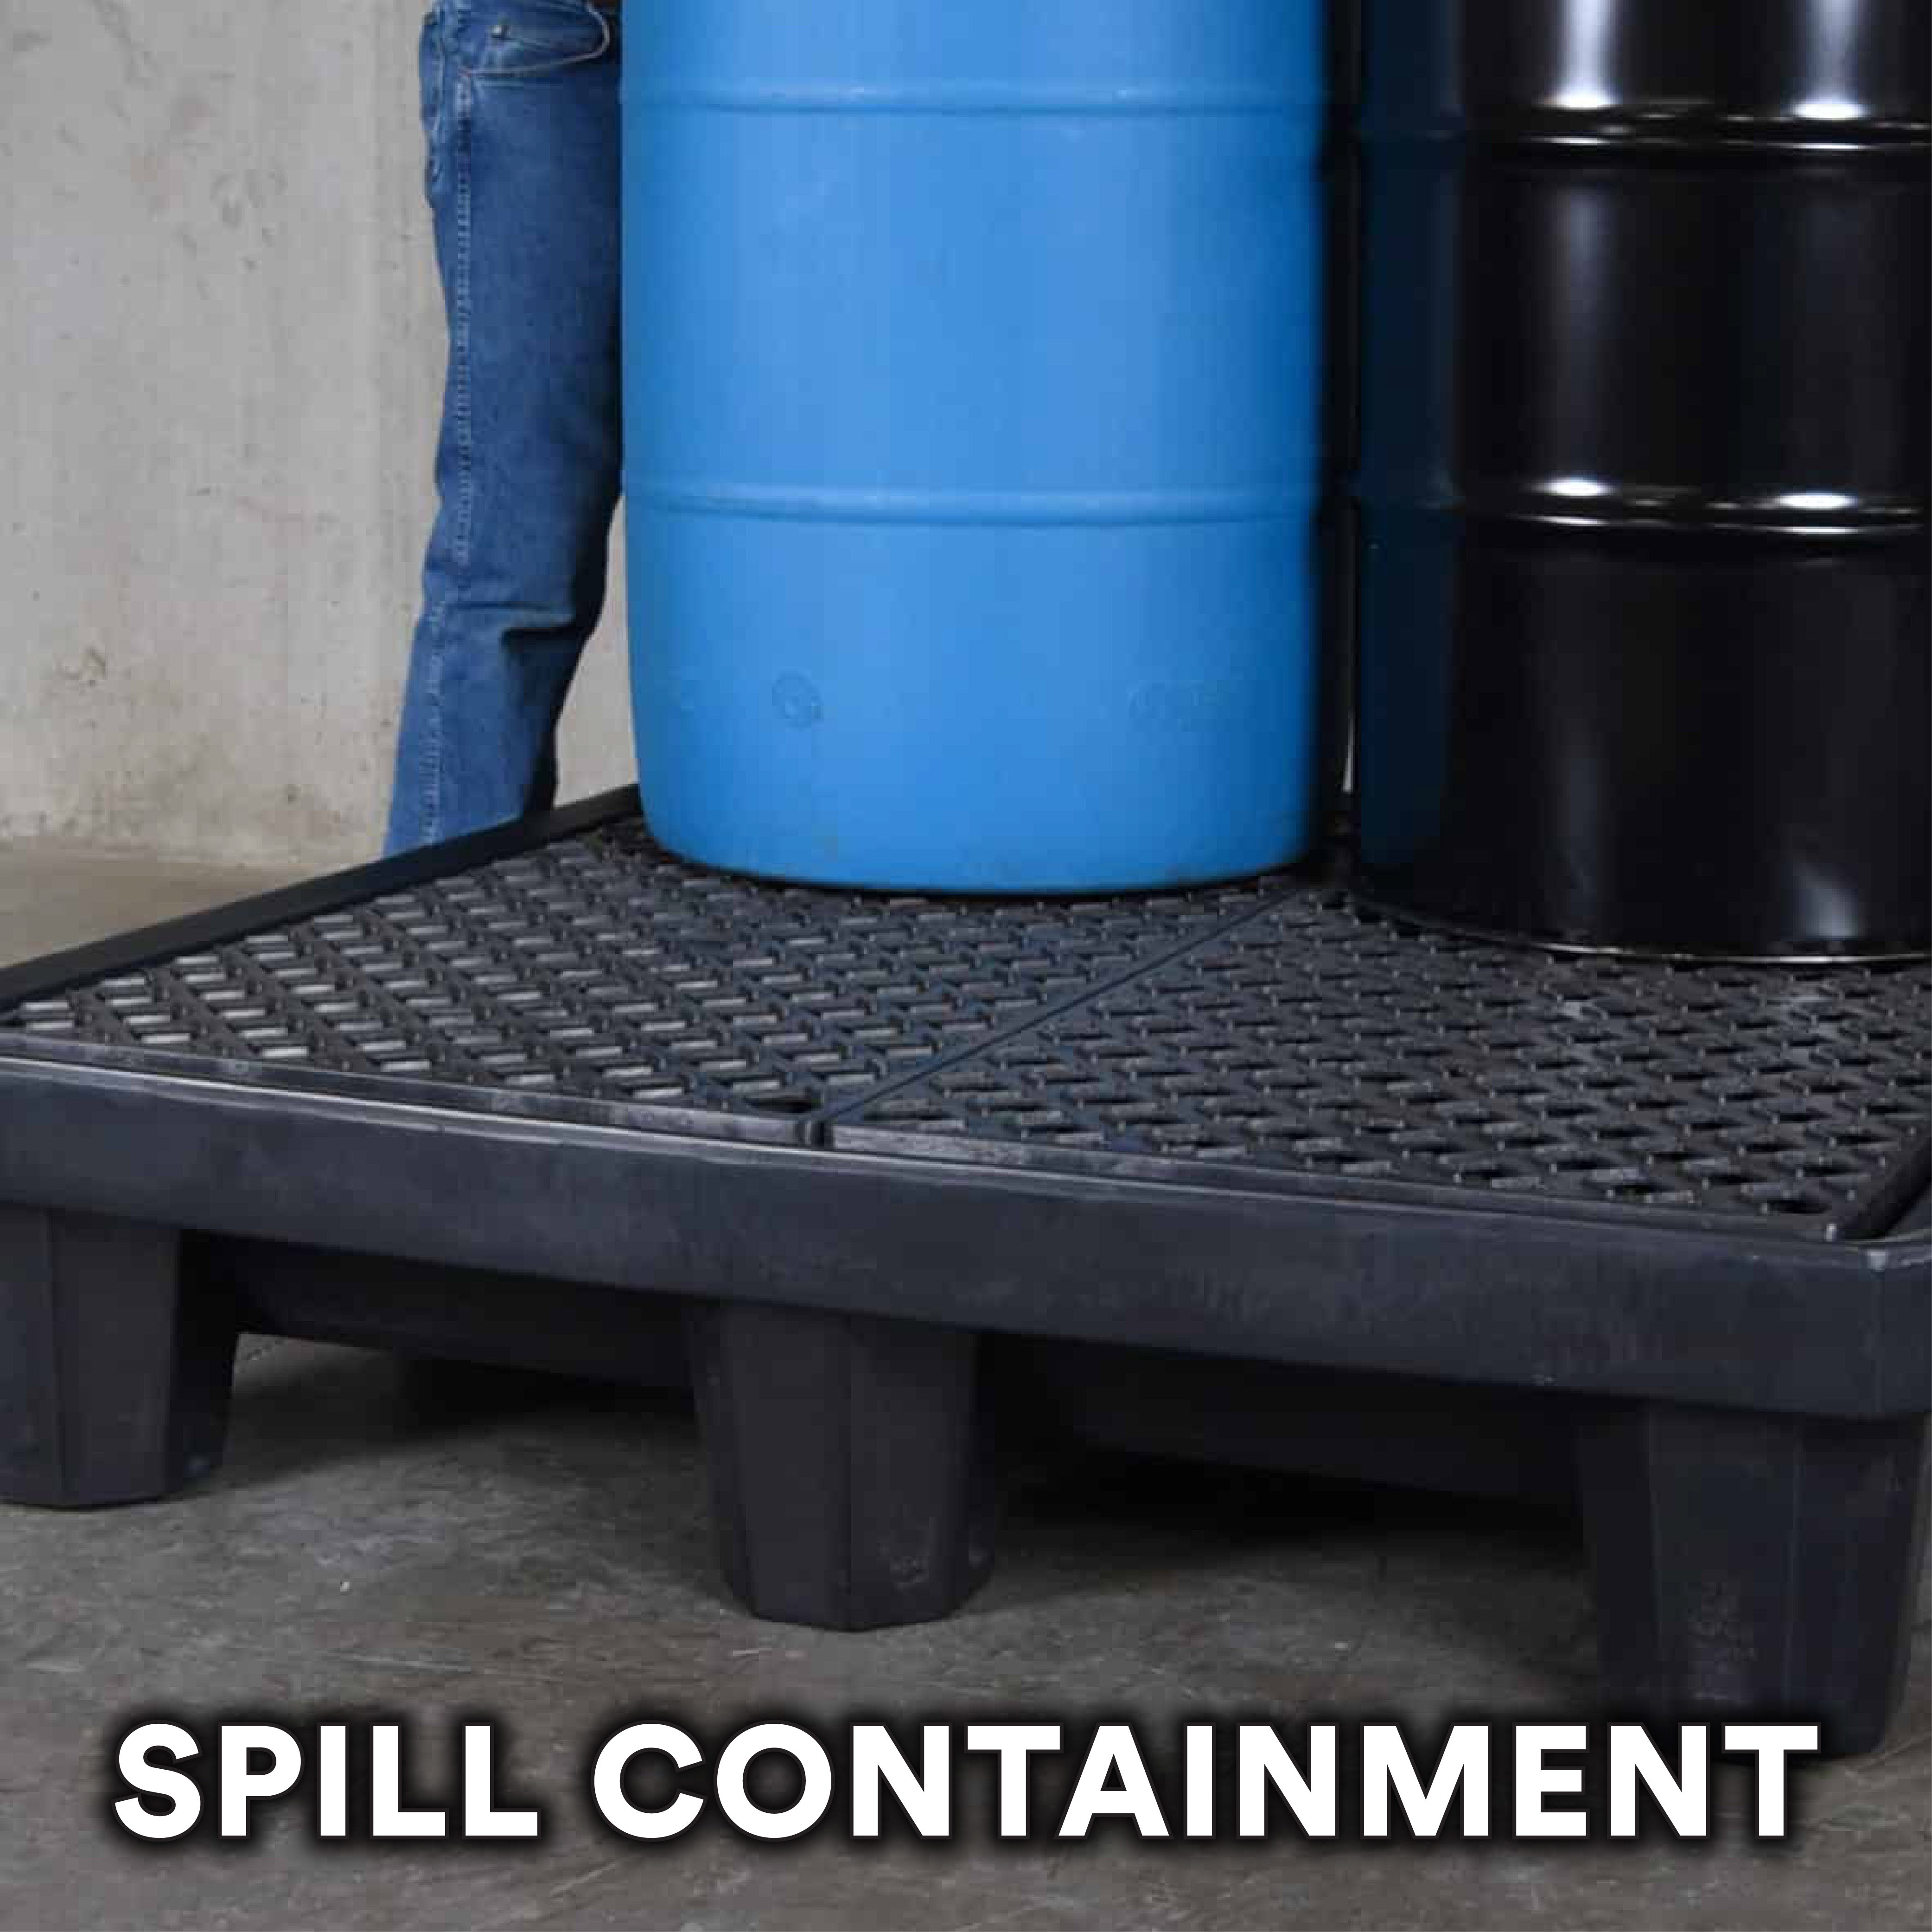 Spill Containment